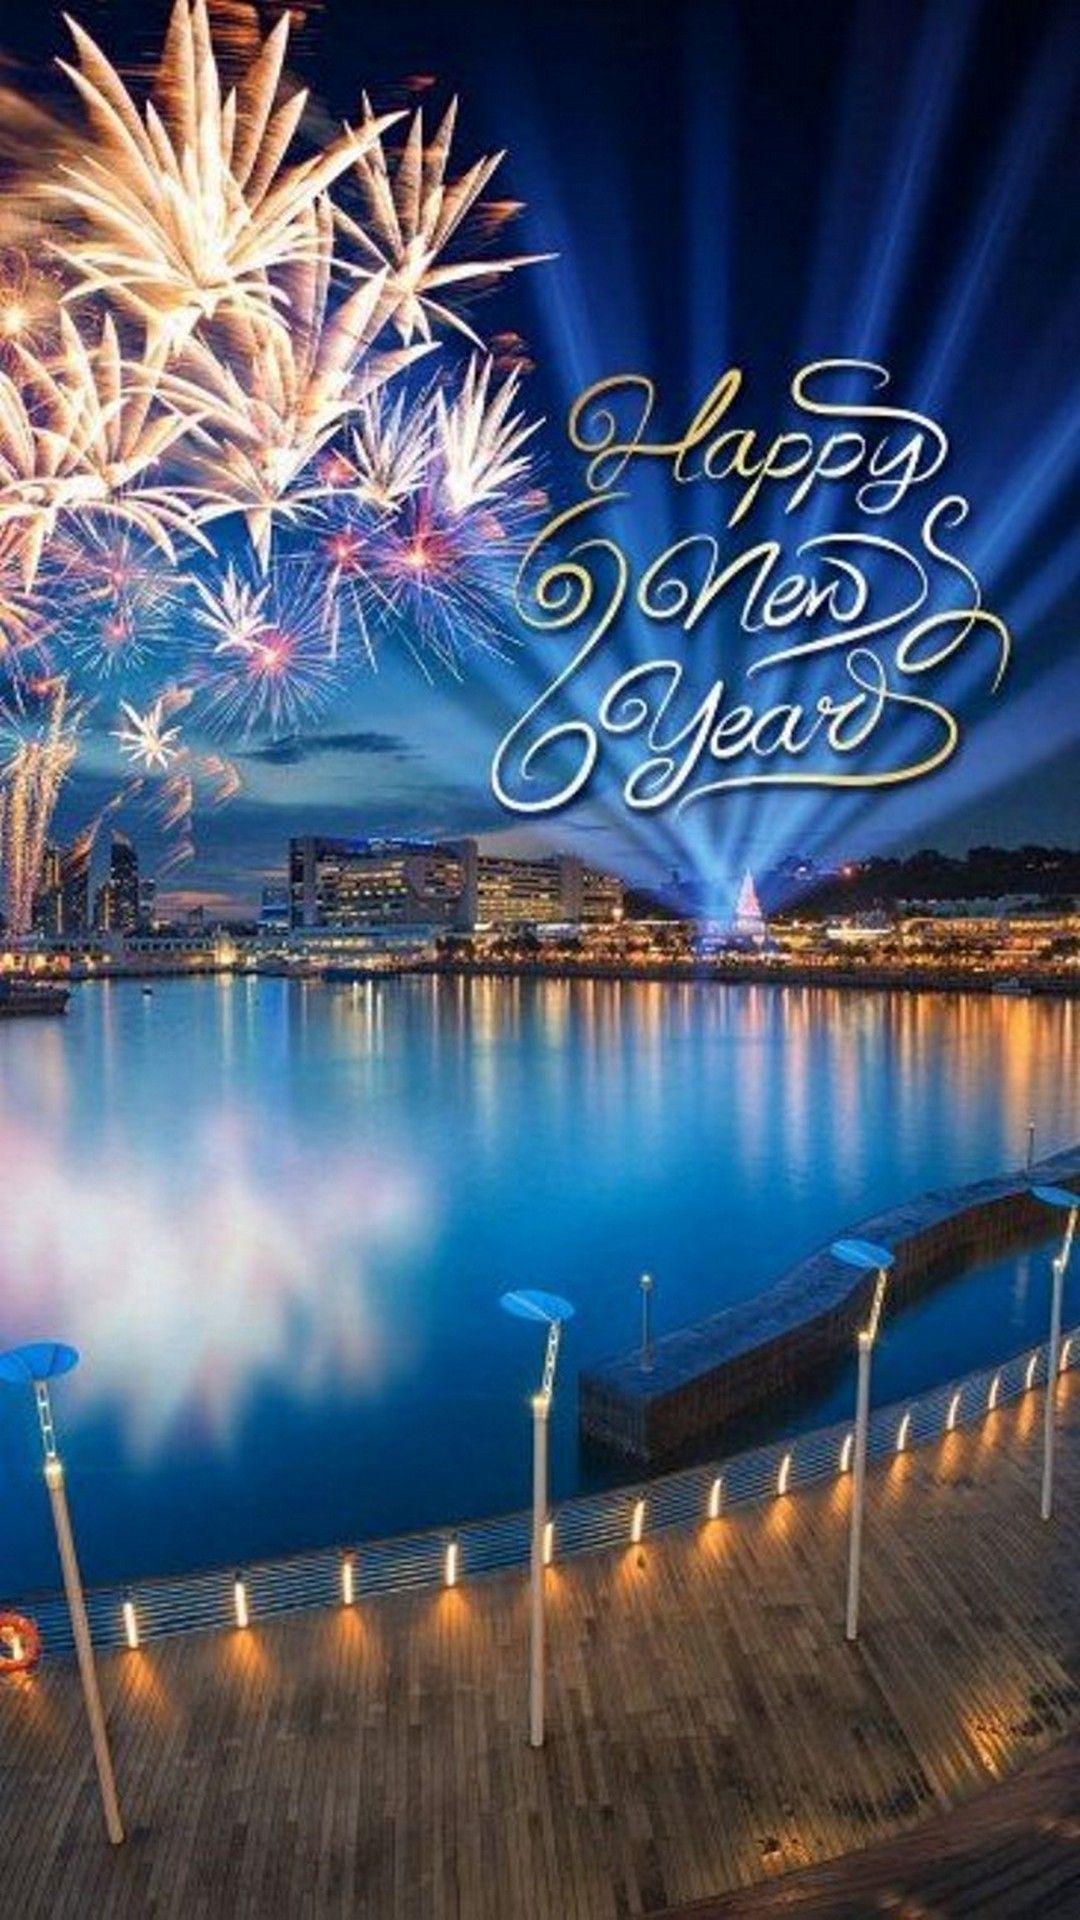 Happy New Year iPhone Live Wallpaper. Happy new year wallpaper, New year image, Happy new year image